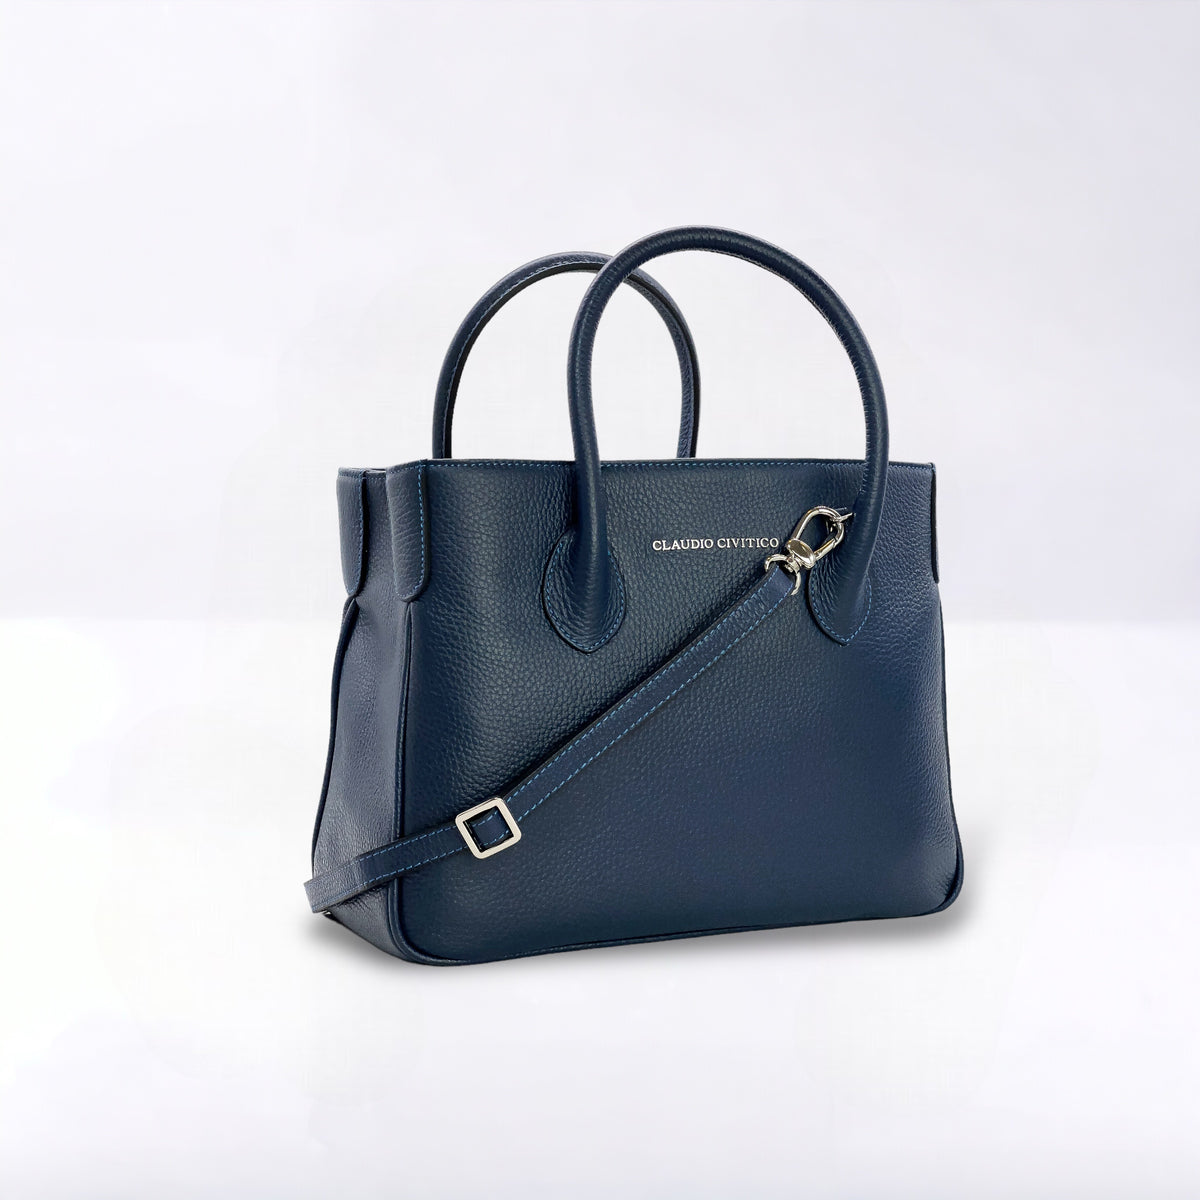 Blue Satchel purse with silver hardware